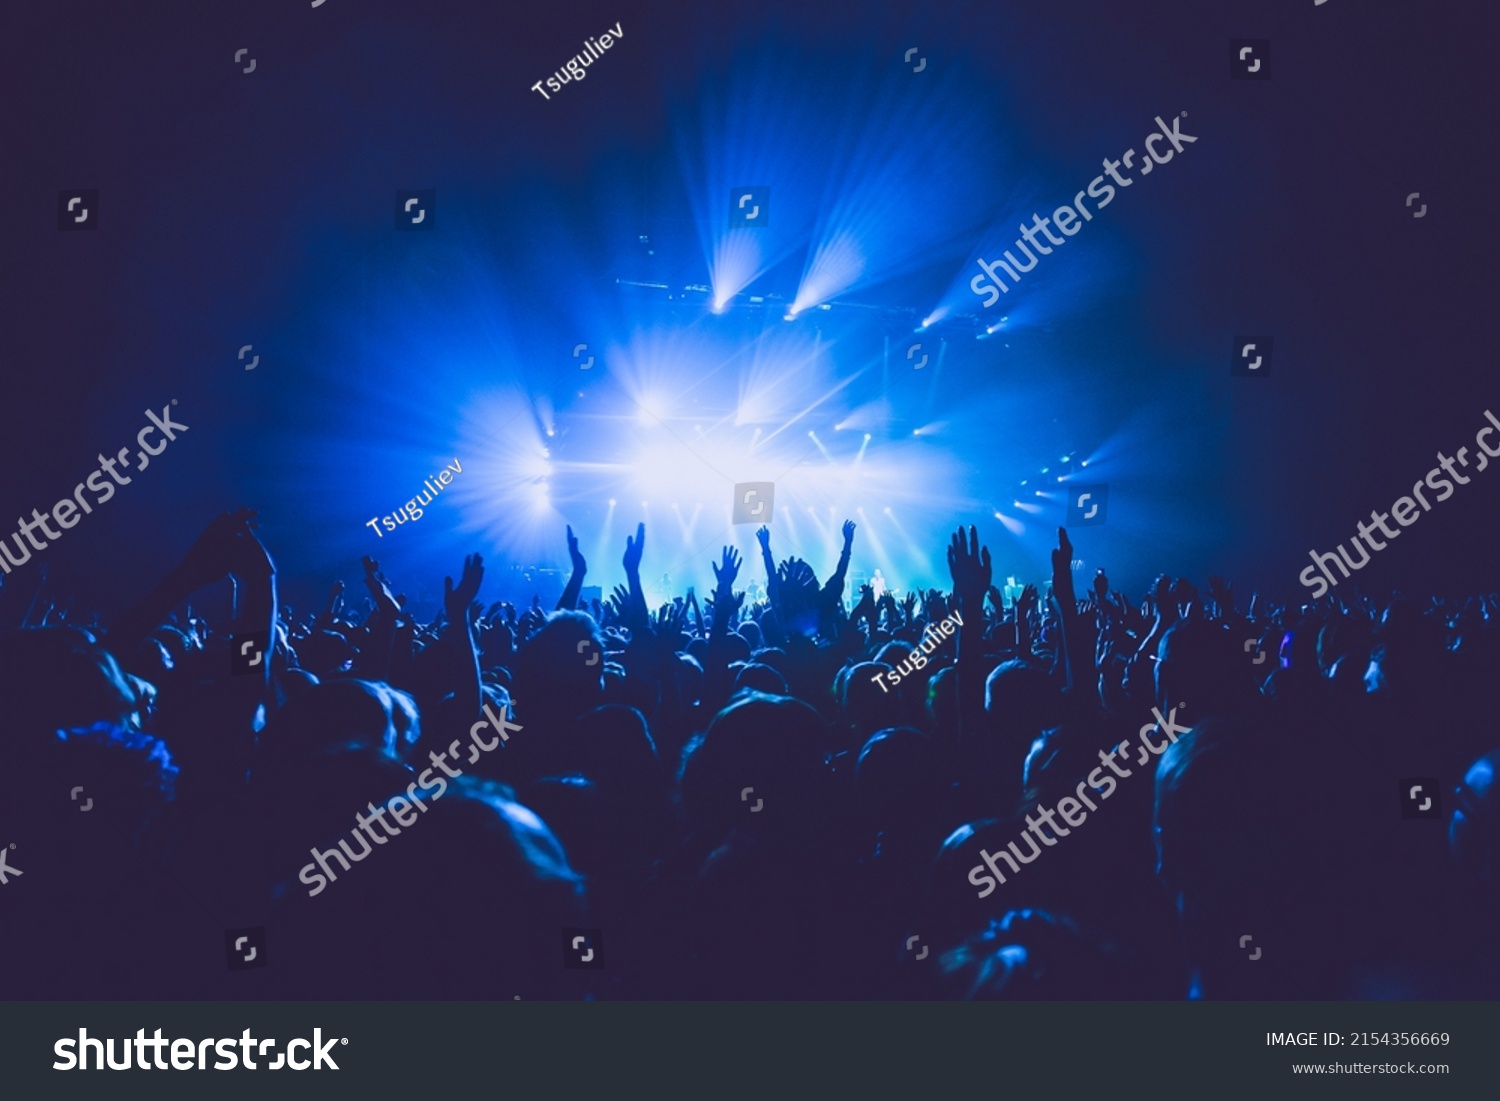 A crowded concert hall with scene stage lights in blue tones, rock show performance, with people silhouette, on a dance floor air during a concert festival #2154356669